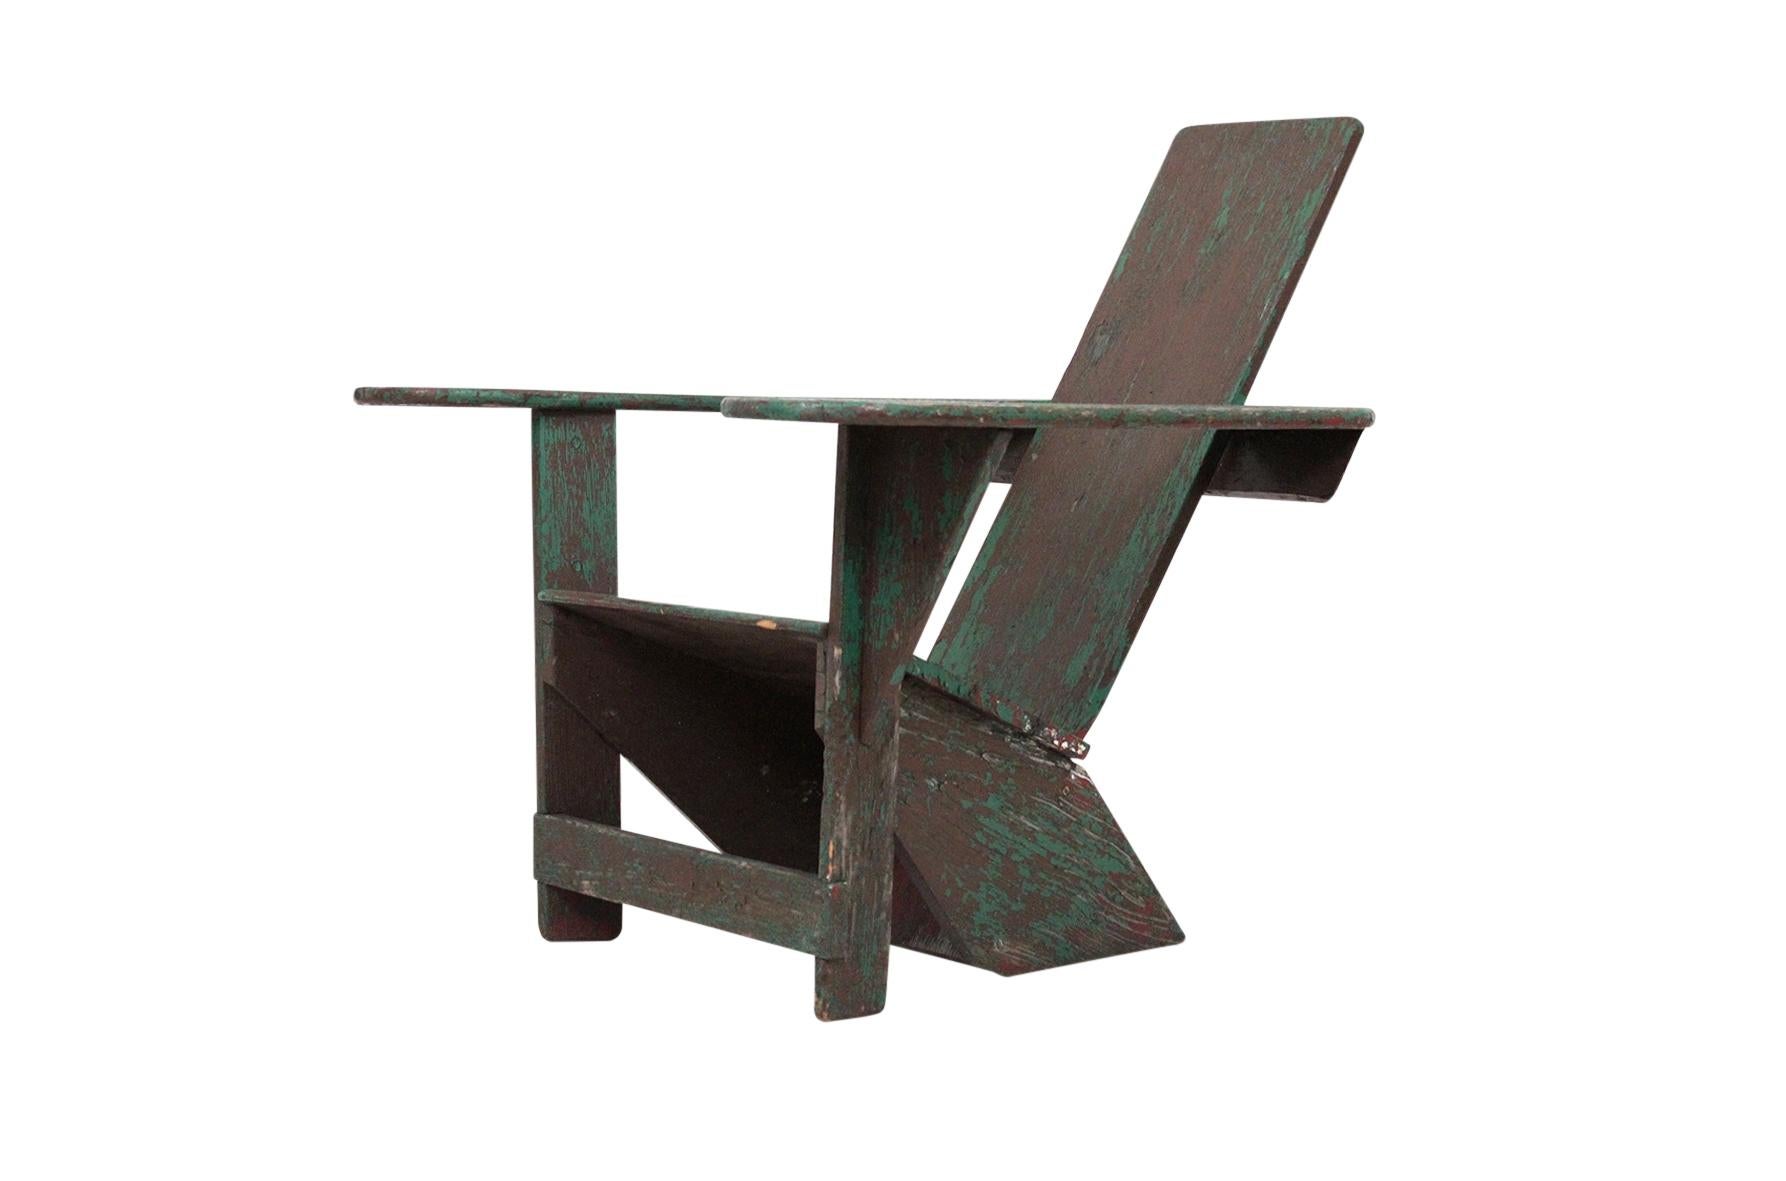 Original Westport Adirondack chair by Harry Bunnell. Designed by Thomas Lee in 1903, patented and manufactured by Harry Bunnell beginning in 1905. This early modernist form was a precursor to later American and European designs of the 20th century.